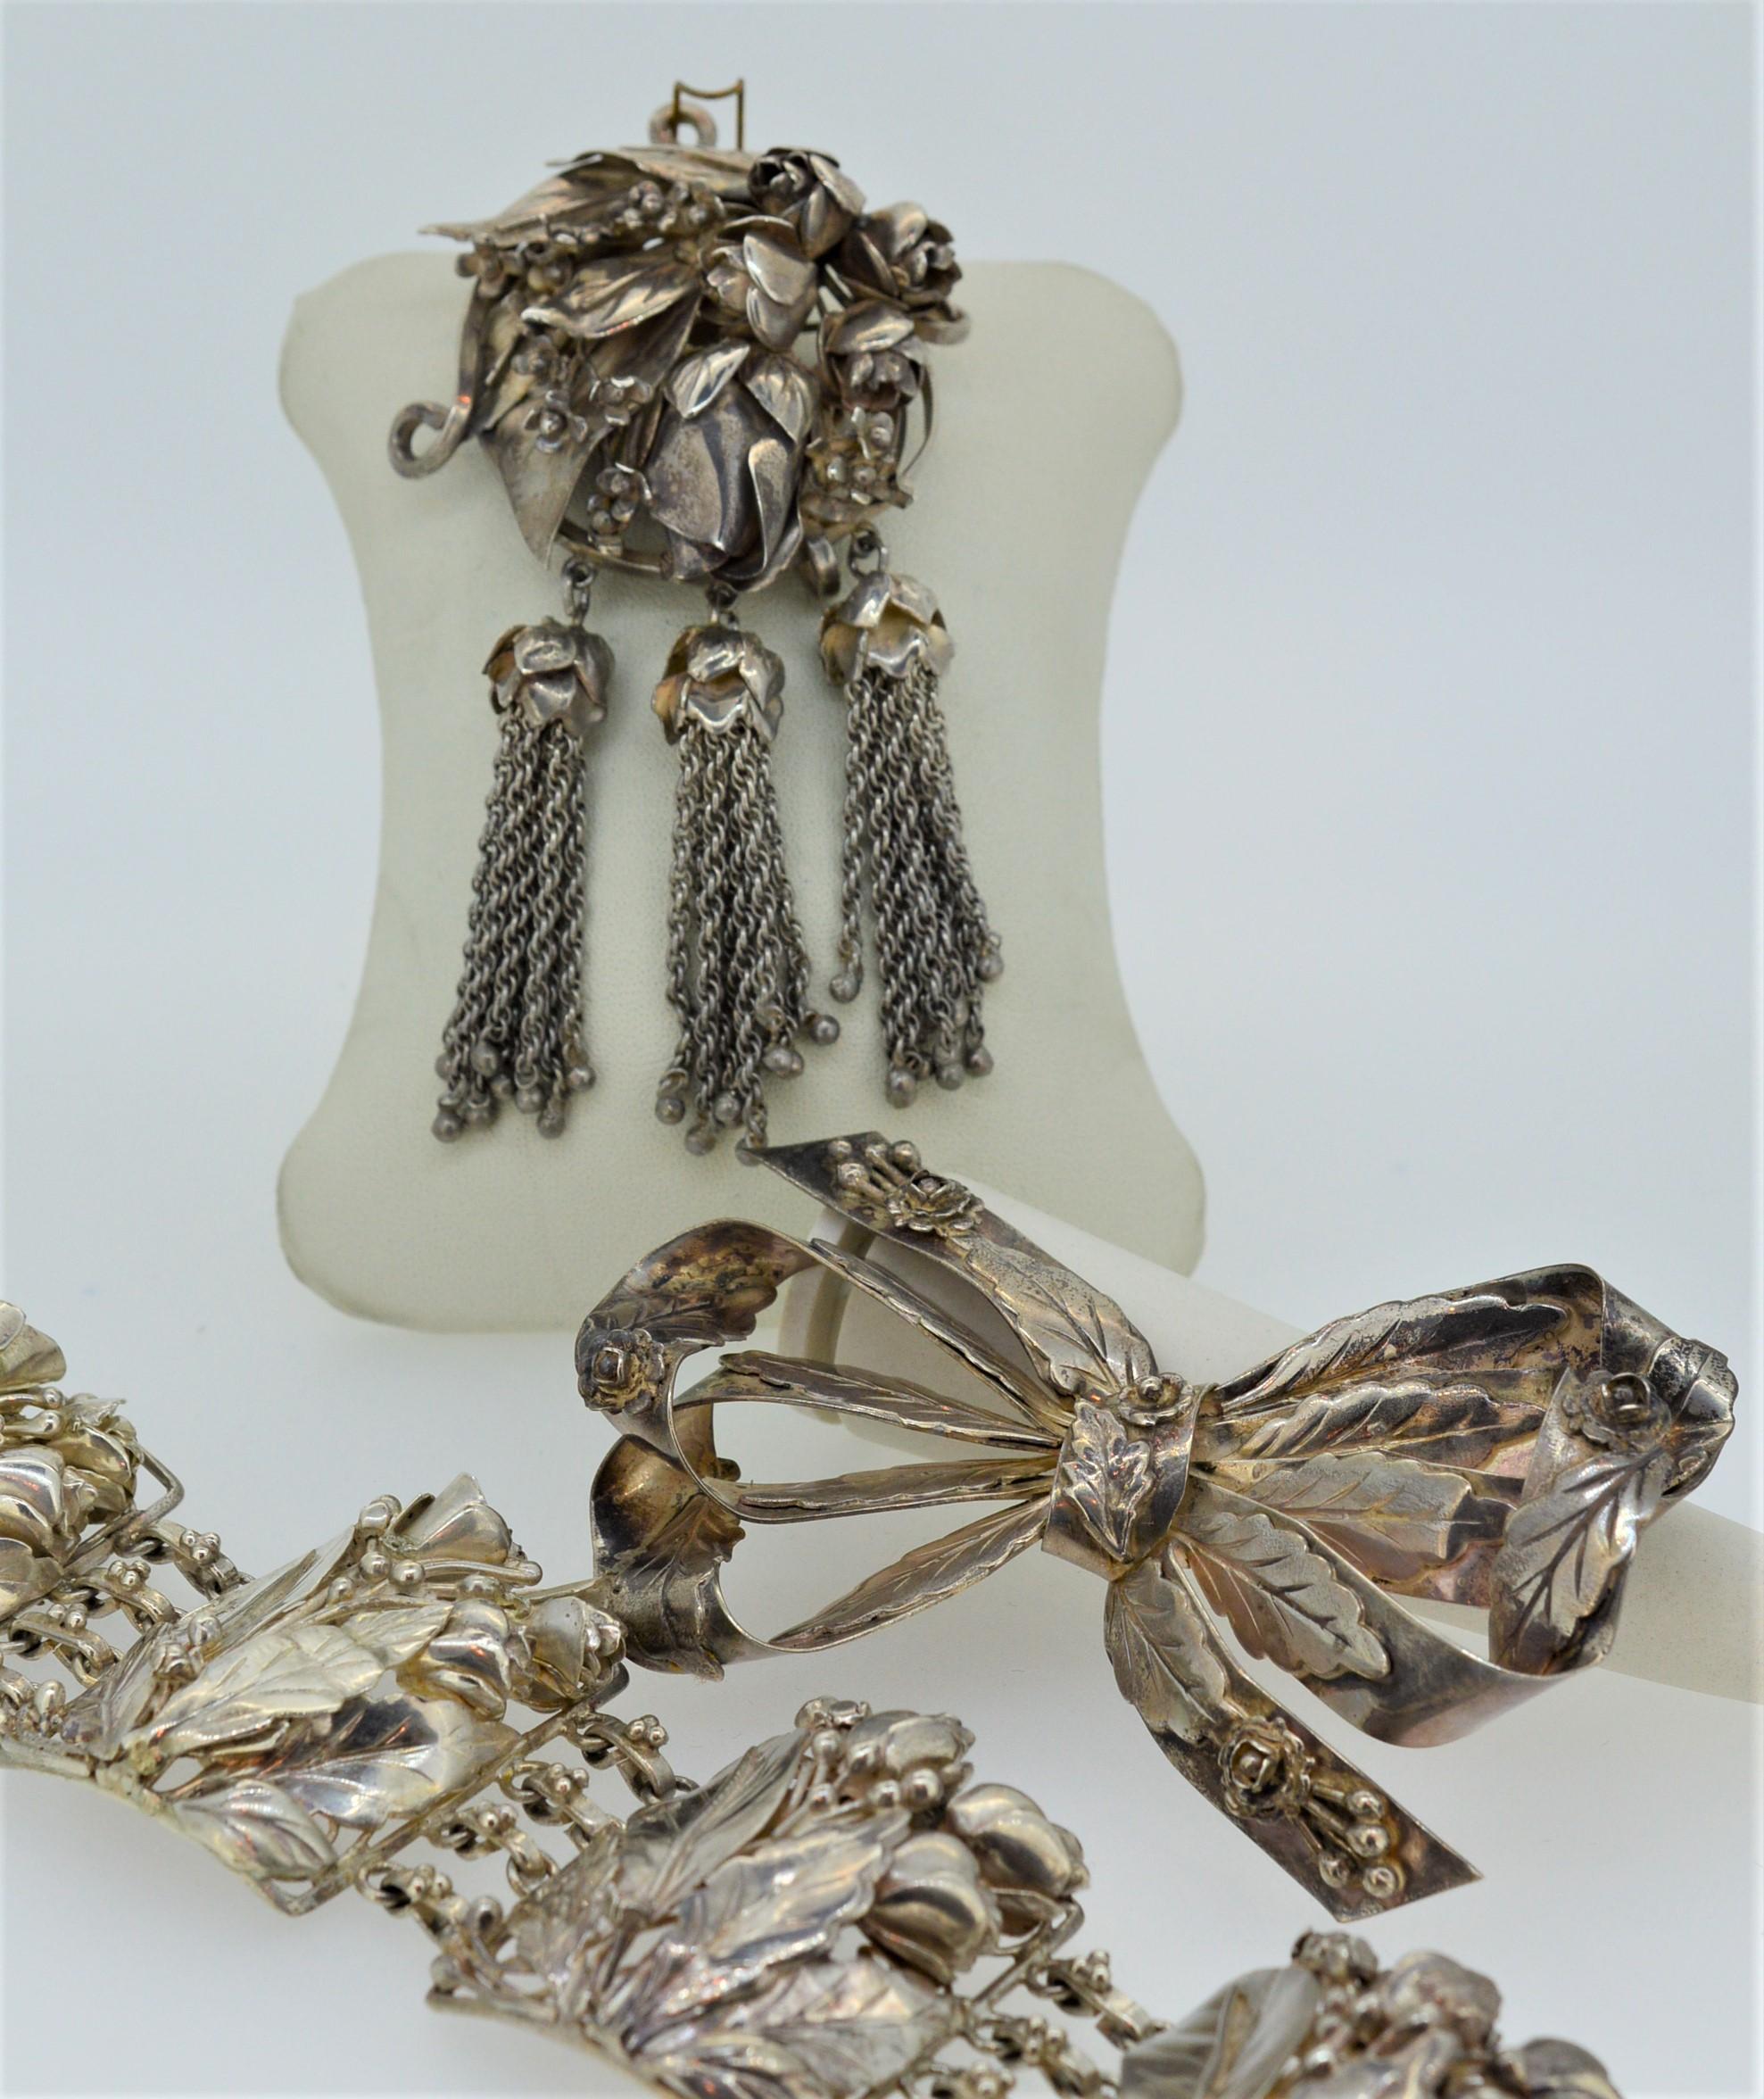 Vintage William Hobe of New York Handcrafted Bracelet, Pendant Brooch & Bow Brooch Set. 
Rare and unusual large Pre-war suite by William Hobe, son of Hobe et Cire  Paris.
Unmatched artisan craftsmanship is carried through to each piece of this